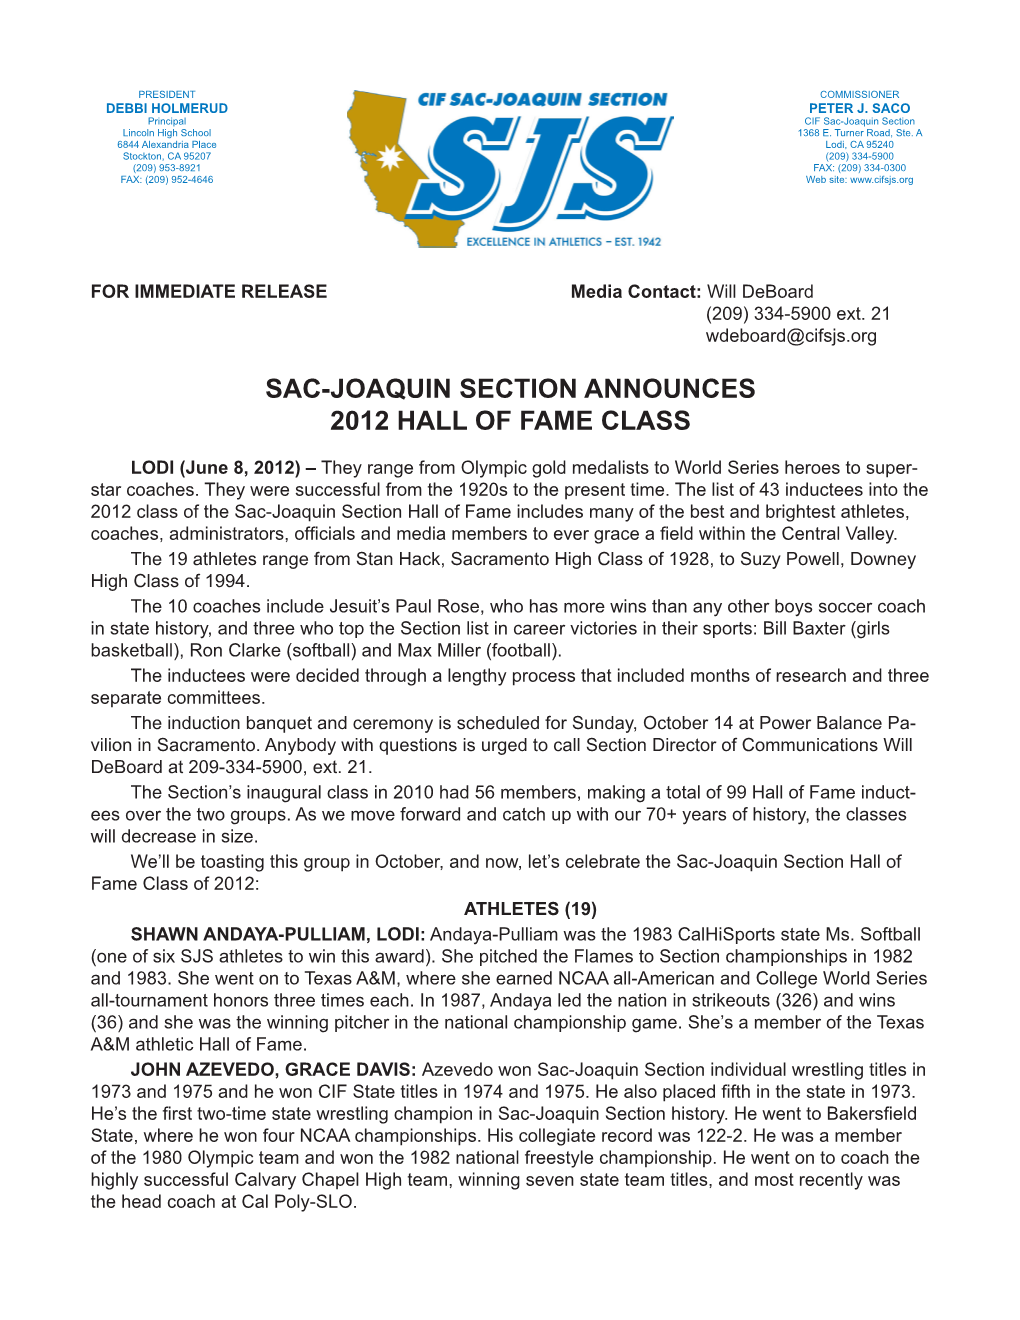 Sac-Joaquin Section Announces 2012 Hall of Fame Class